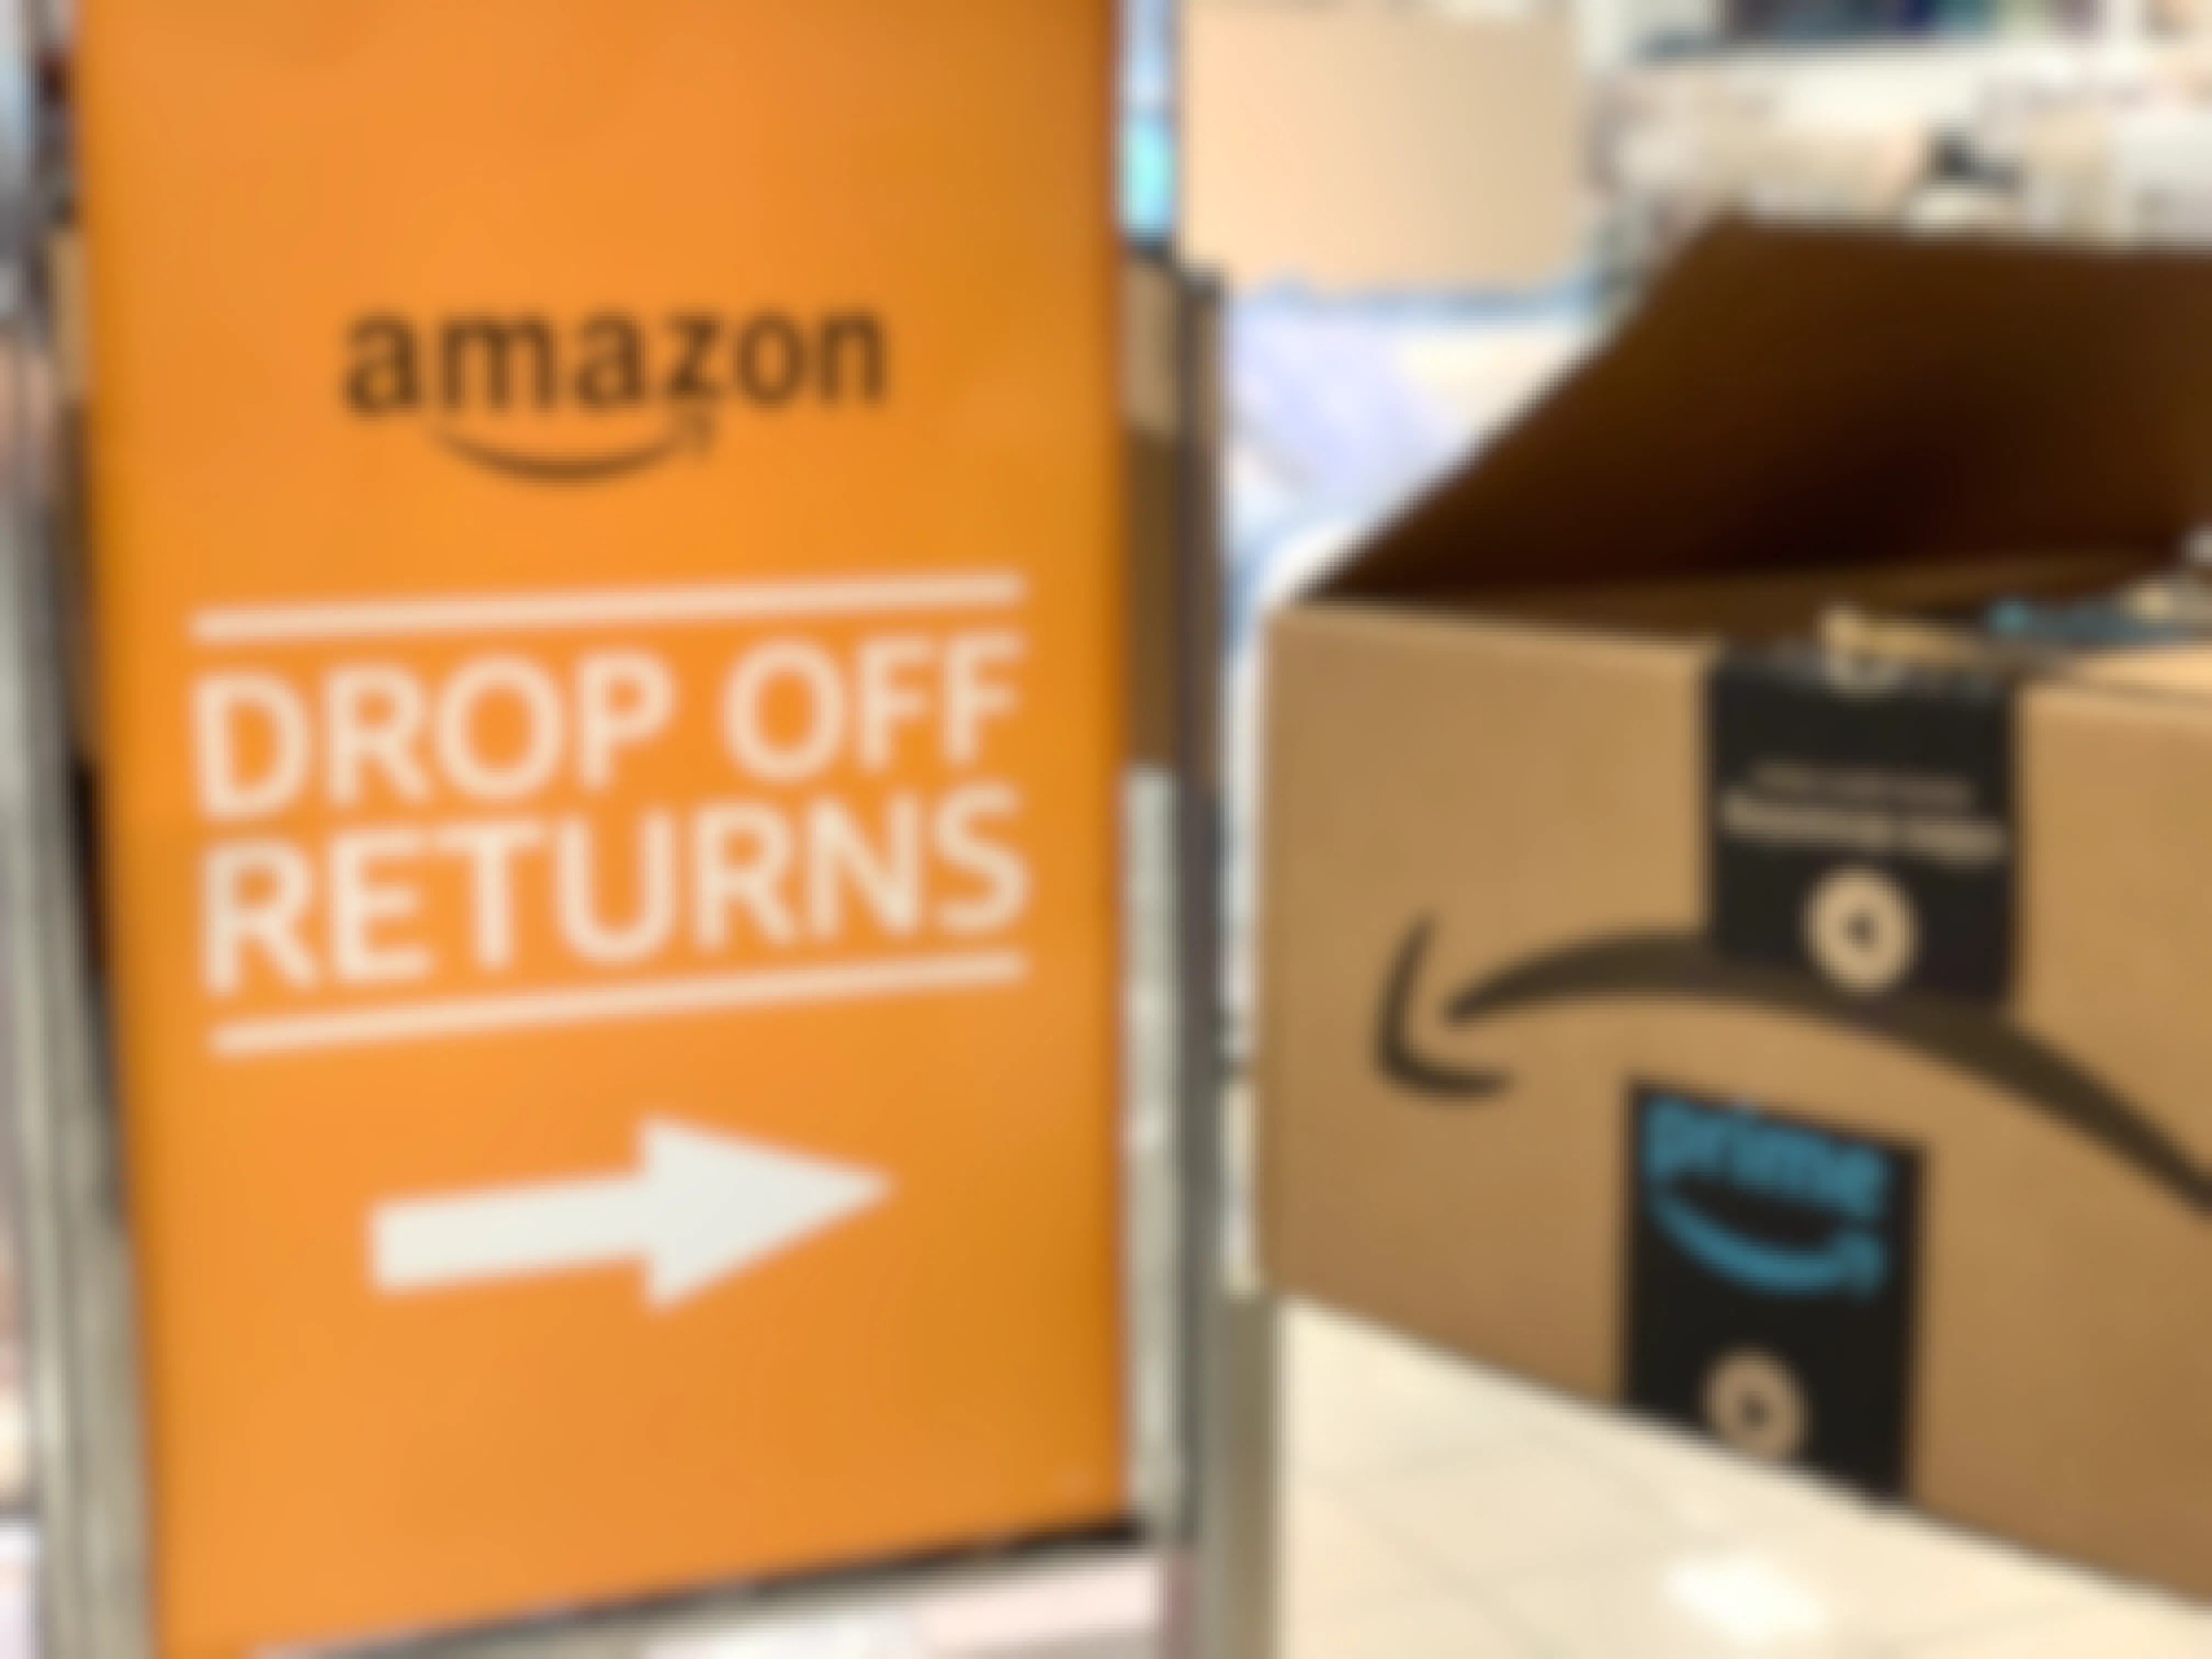 An Amazon box being held up next to a sign directing where to drop off Amazon returns at Kohl's.